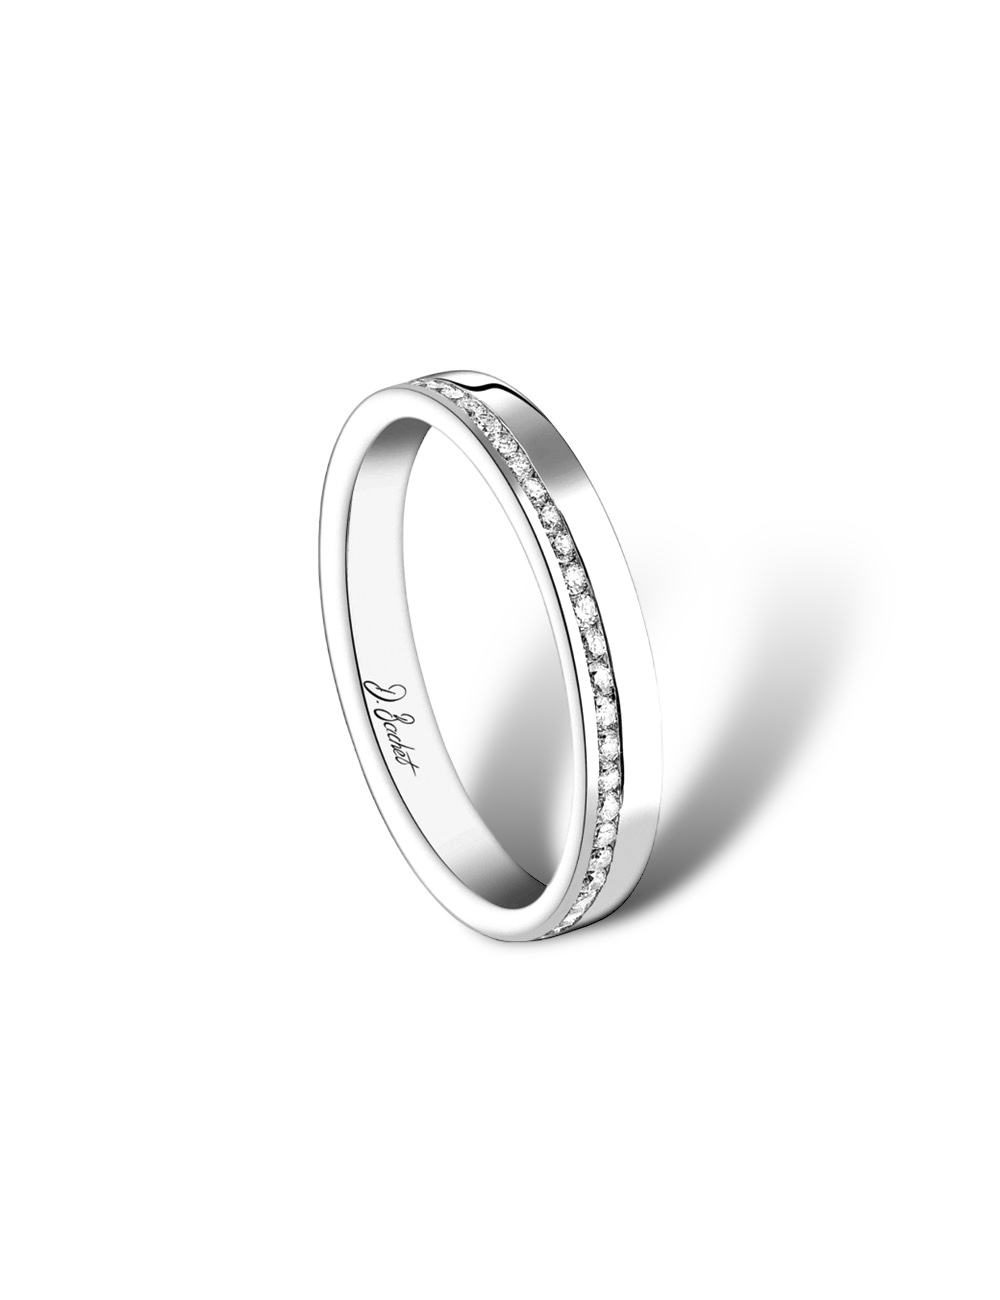 Refined women's diamond ring with modern lines in platinum, perfect to be worn alone or with an engagement ring.